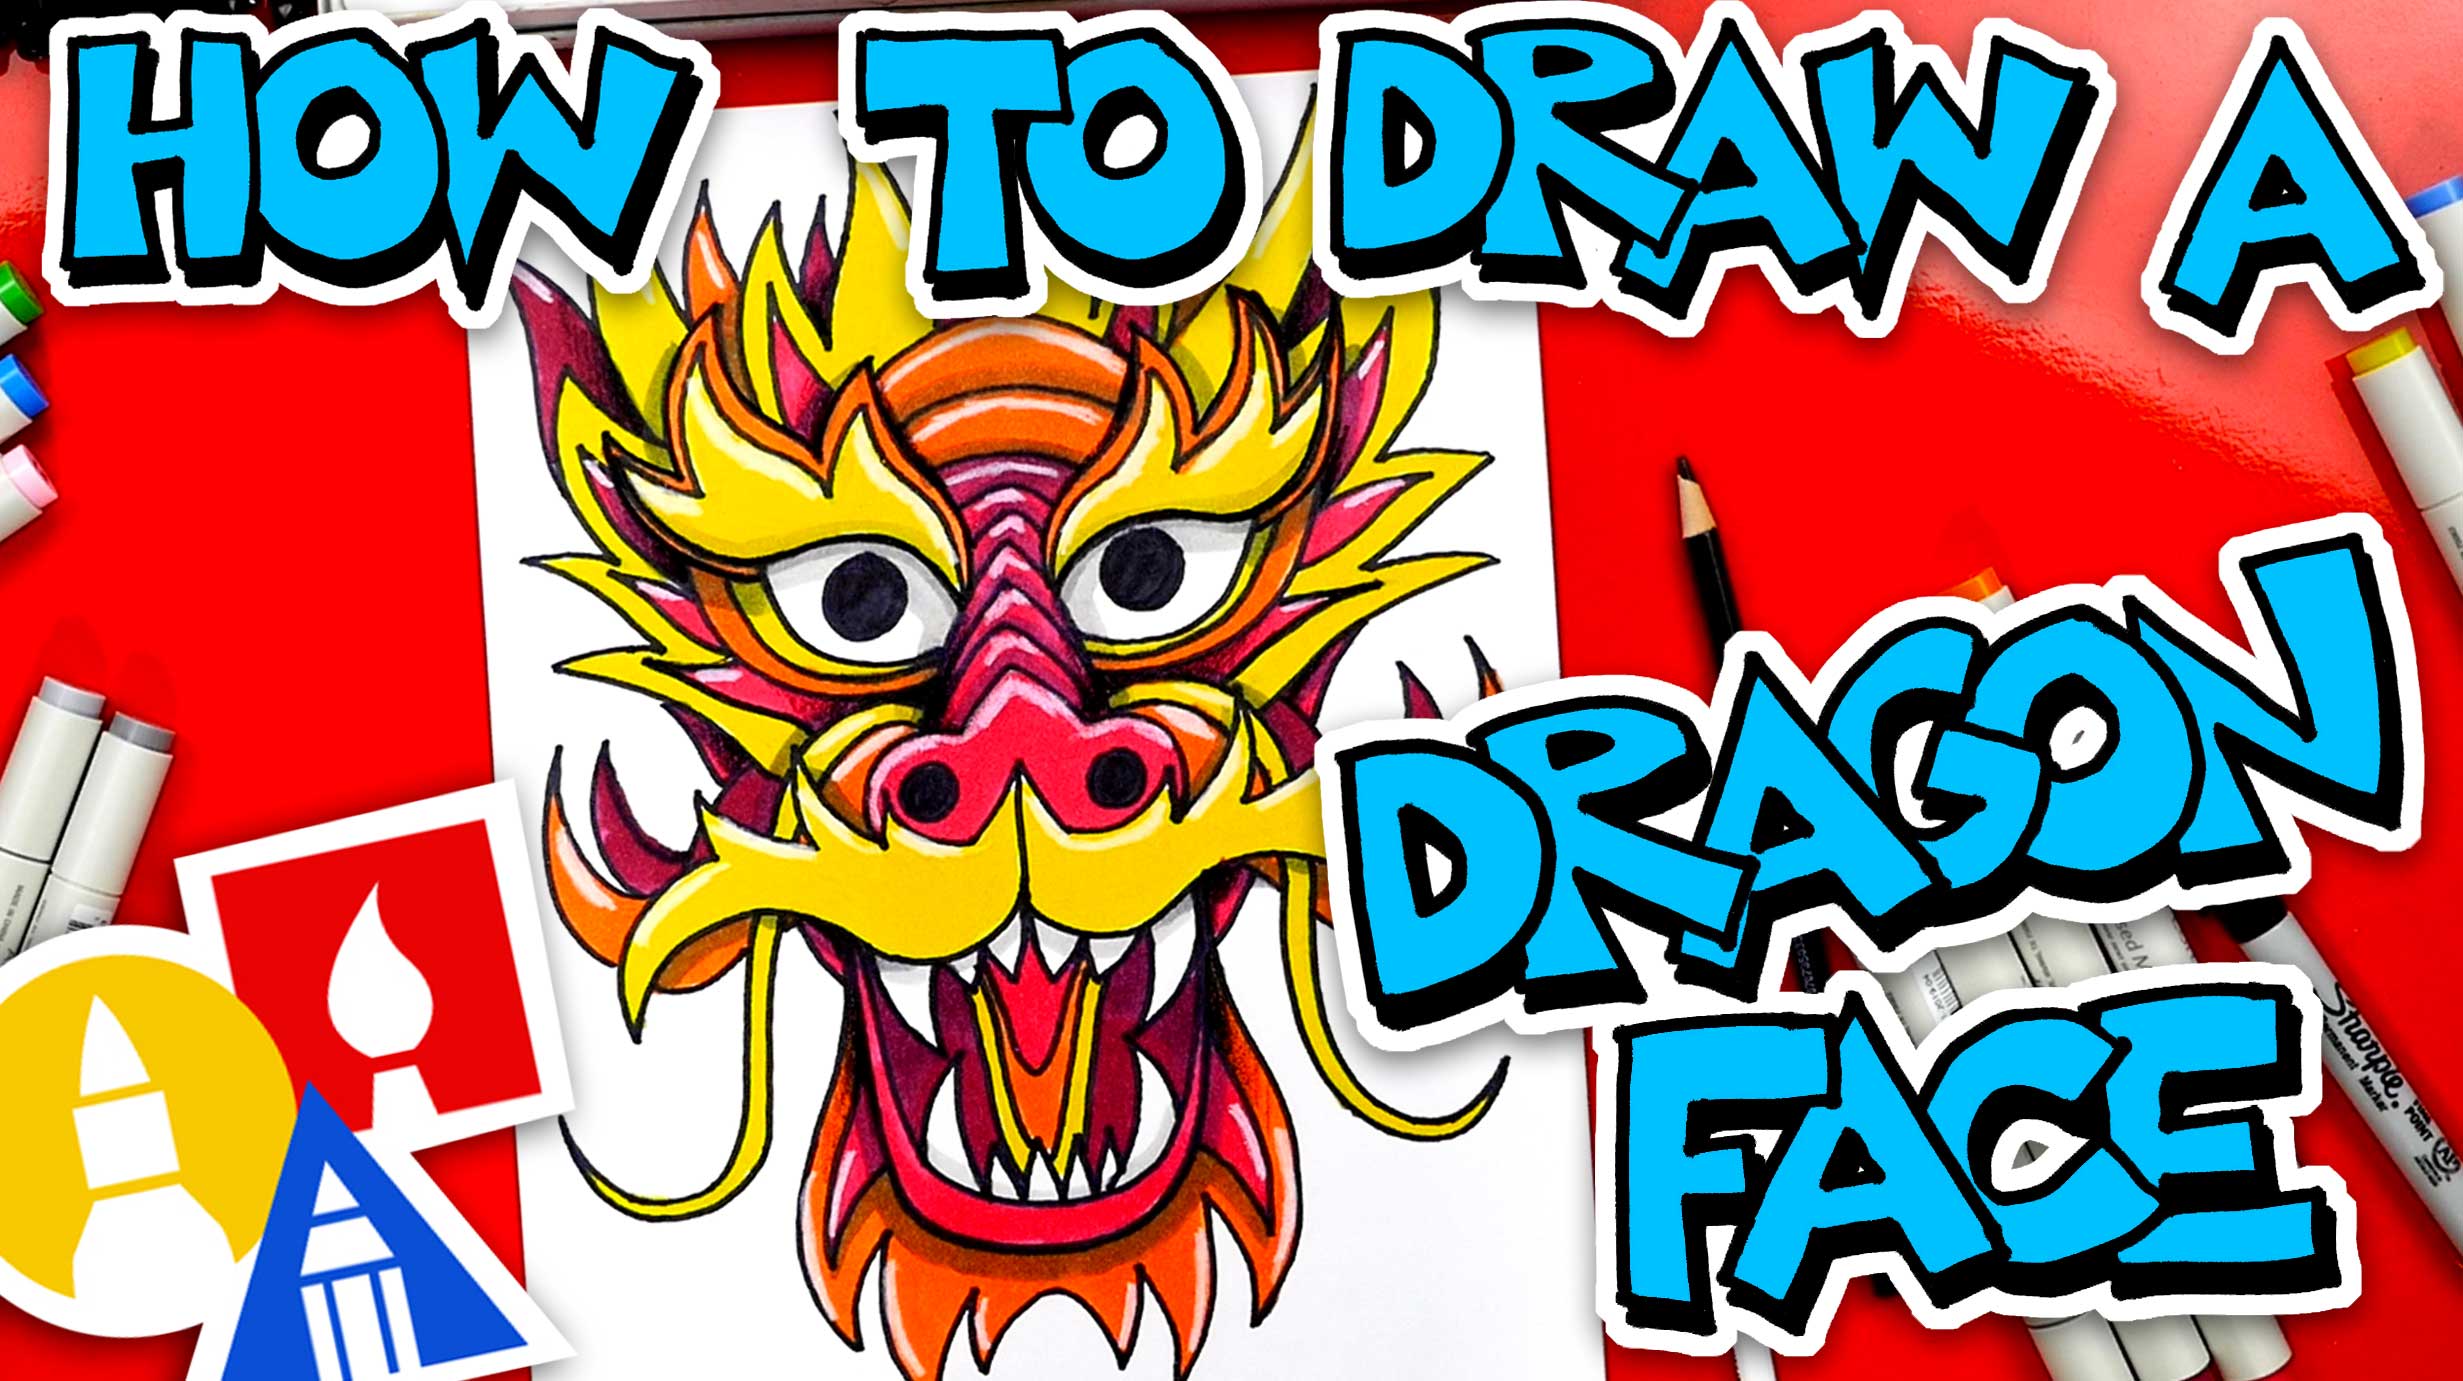 how to draw a dragon face